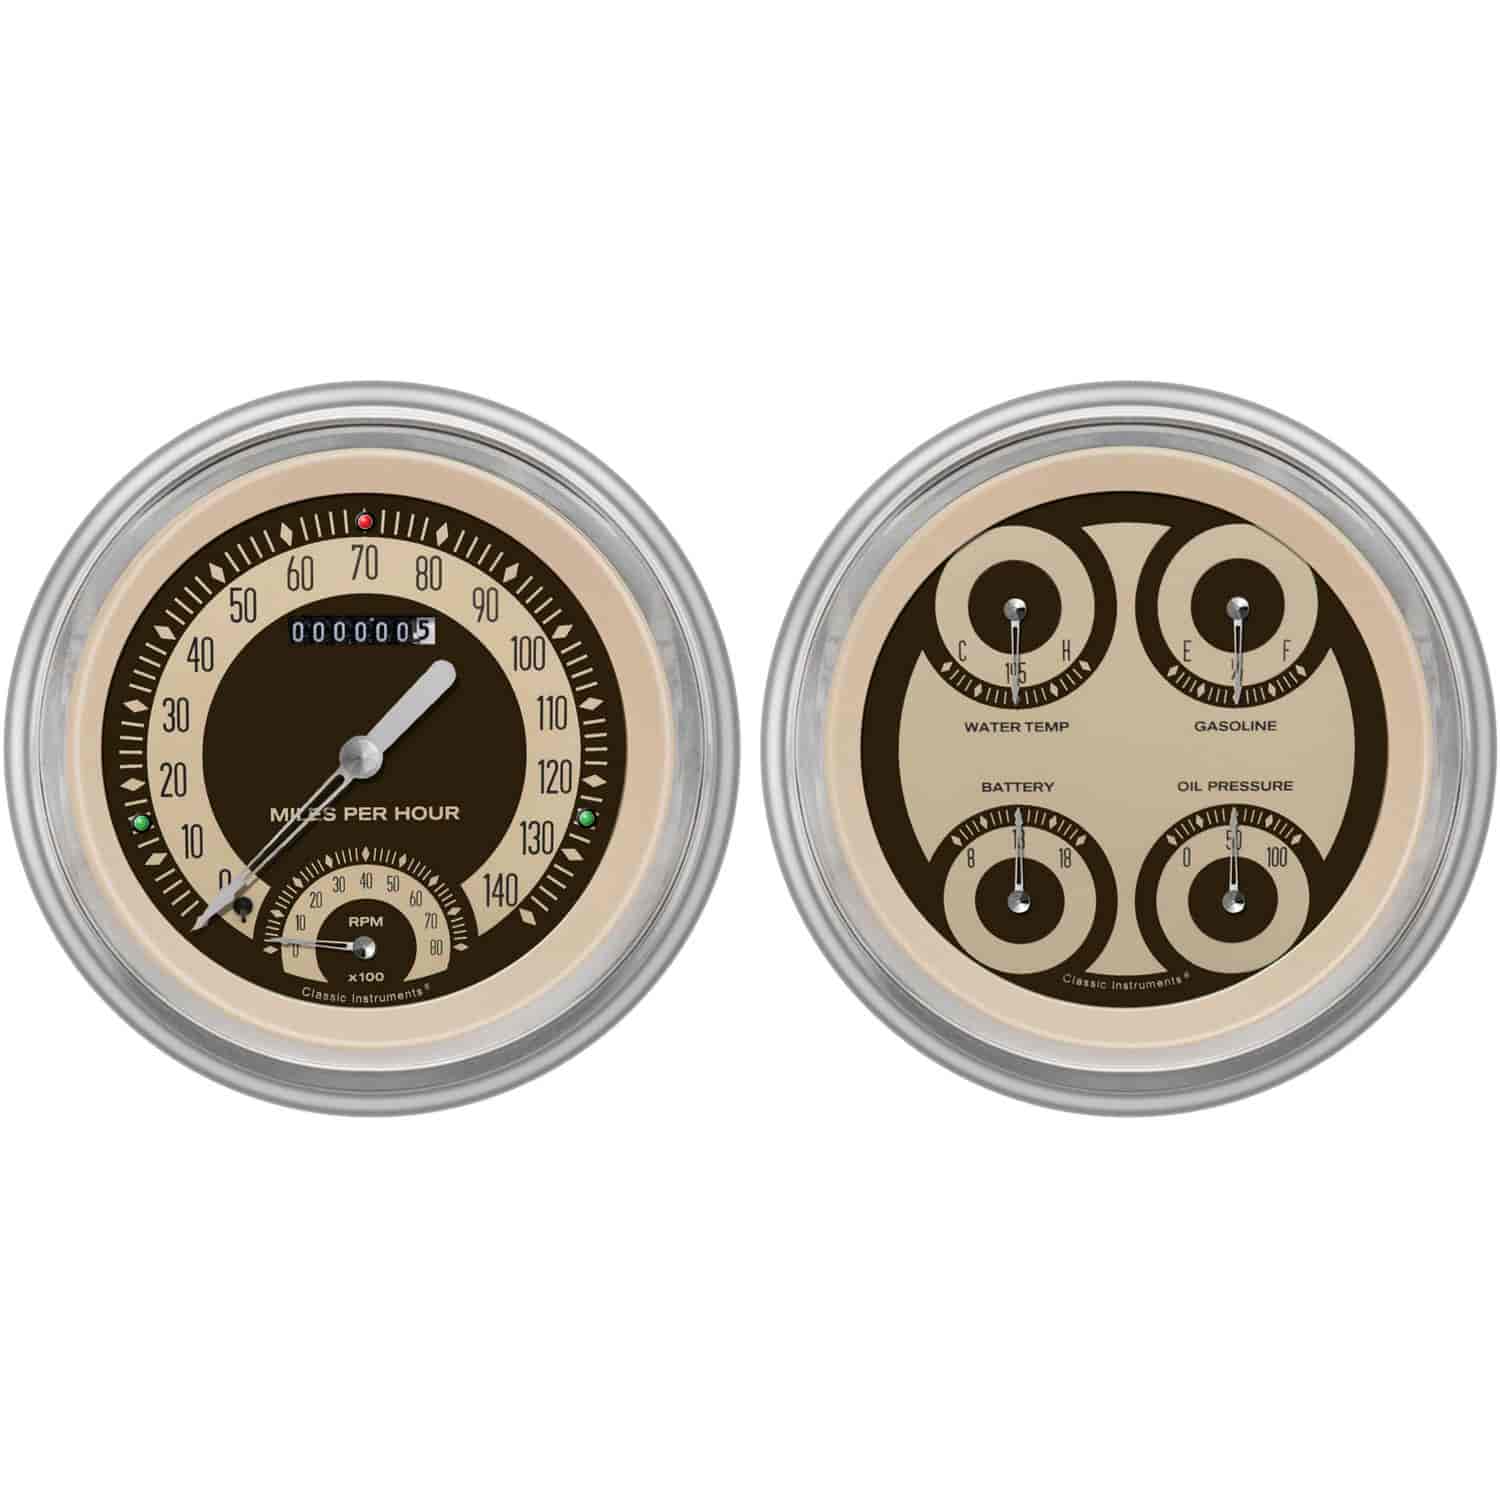 Nostalgia VT Series Gauge Package 1951-52 Chevy Car Includes: